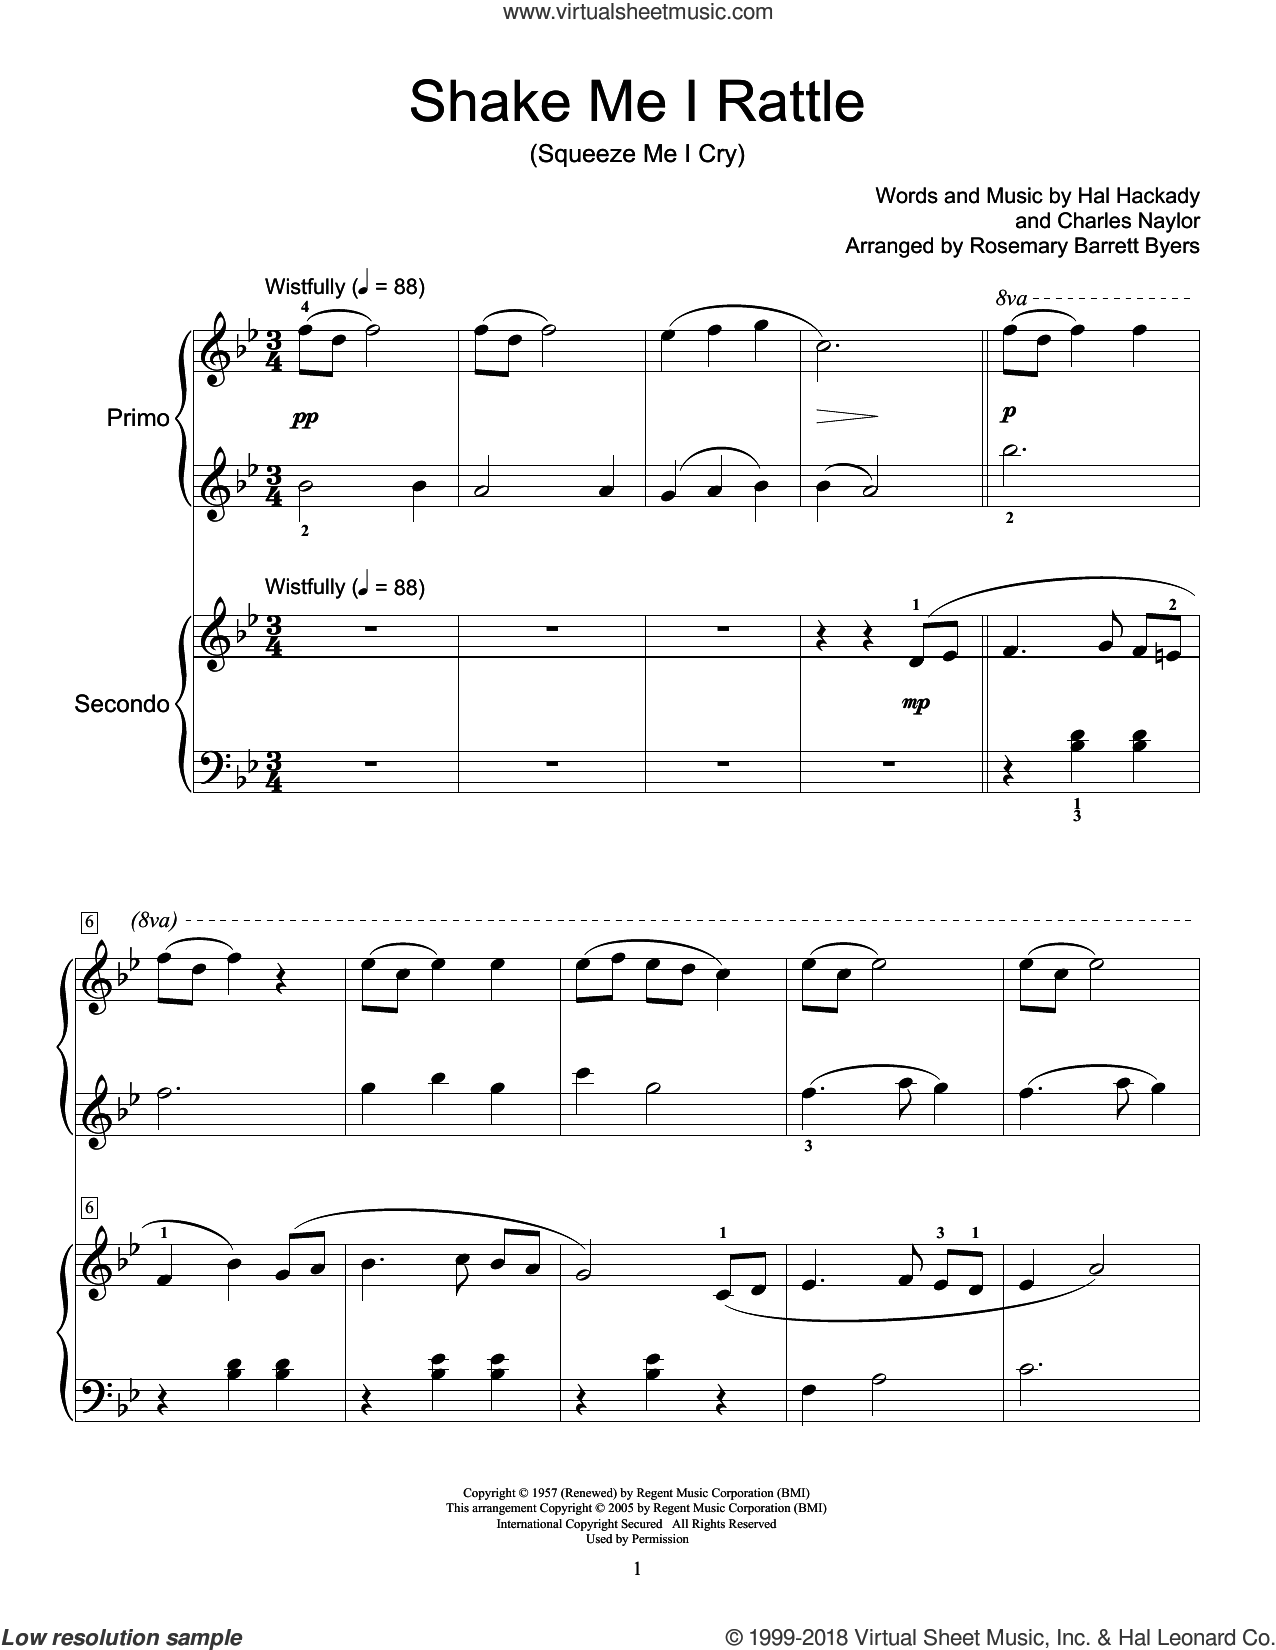 Free sheet music preview of Shake Me I Rattle (Squeeze Me I Cry) for piano ...